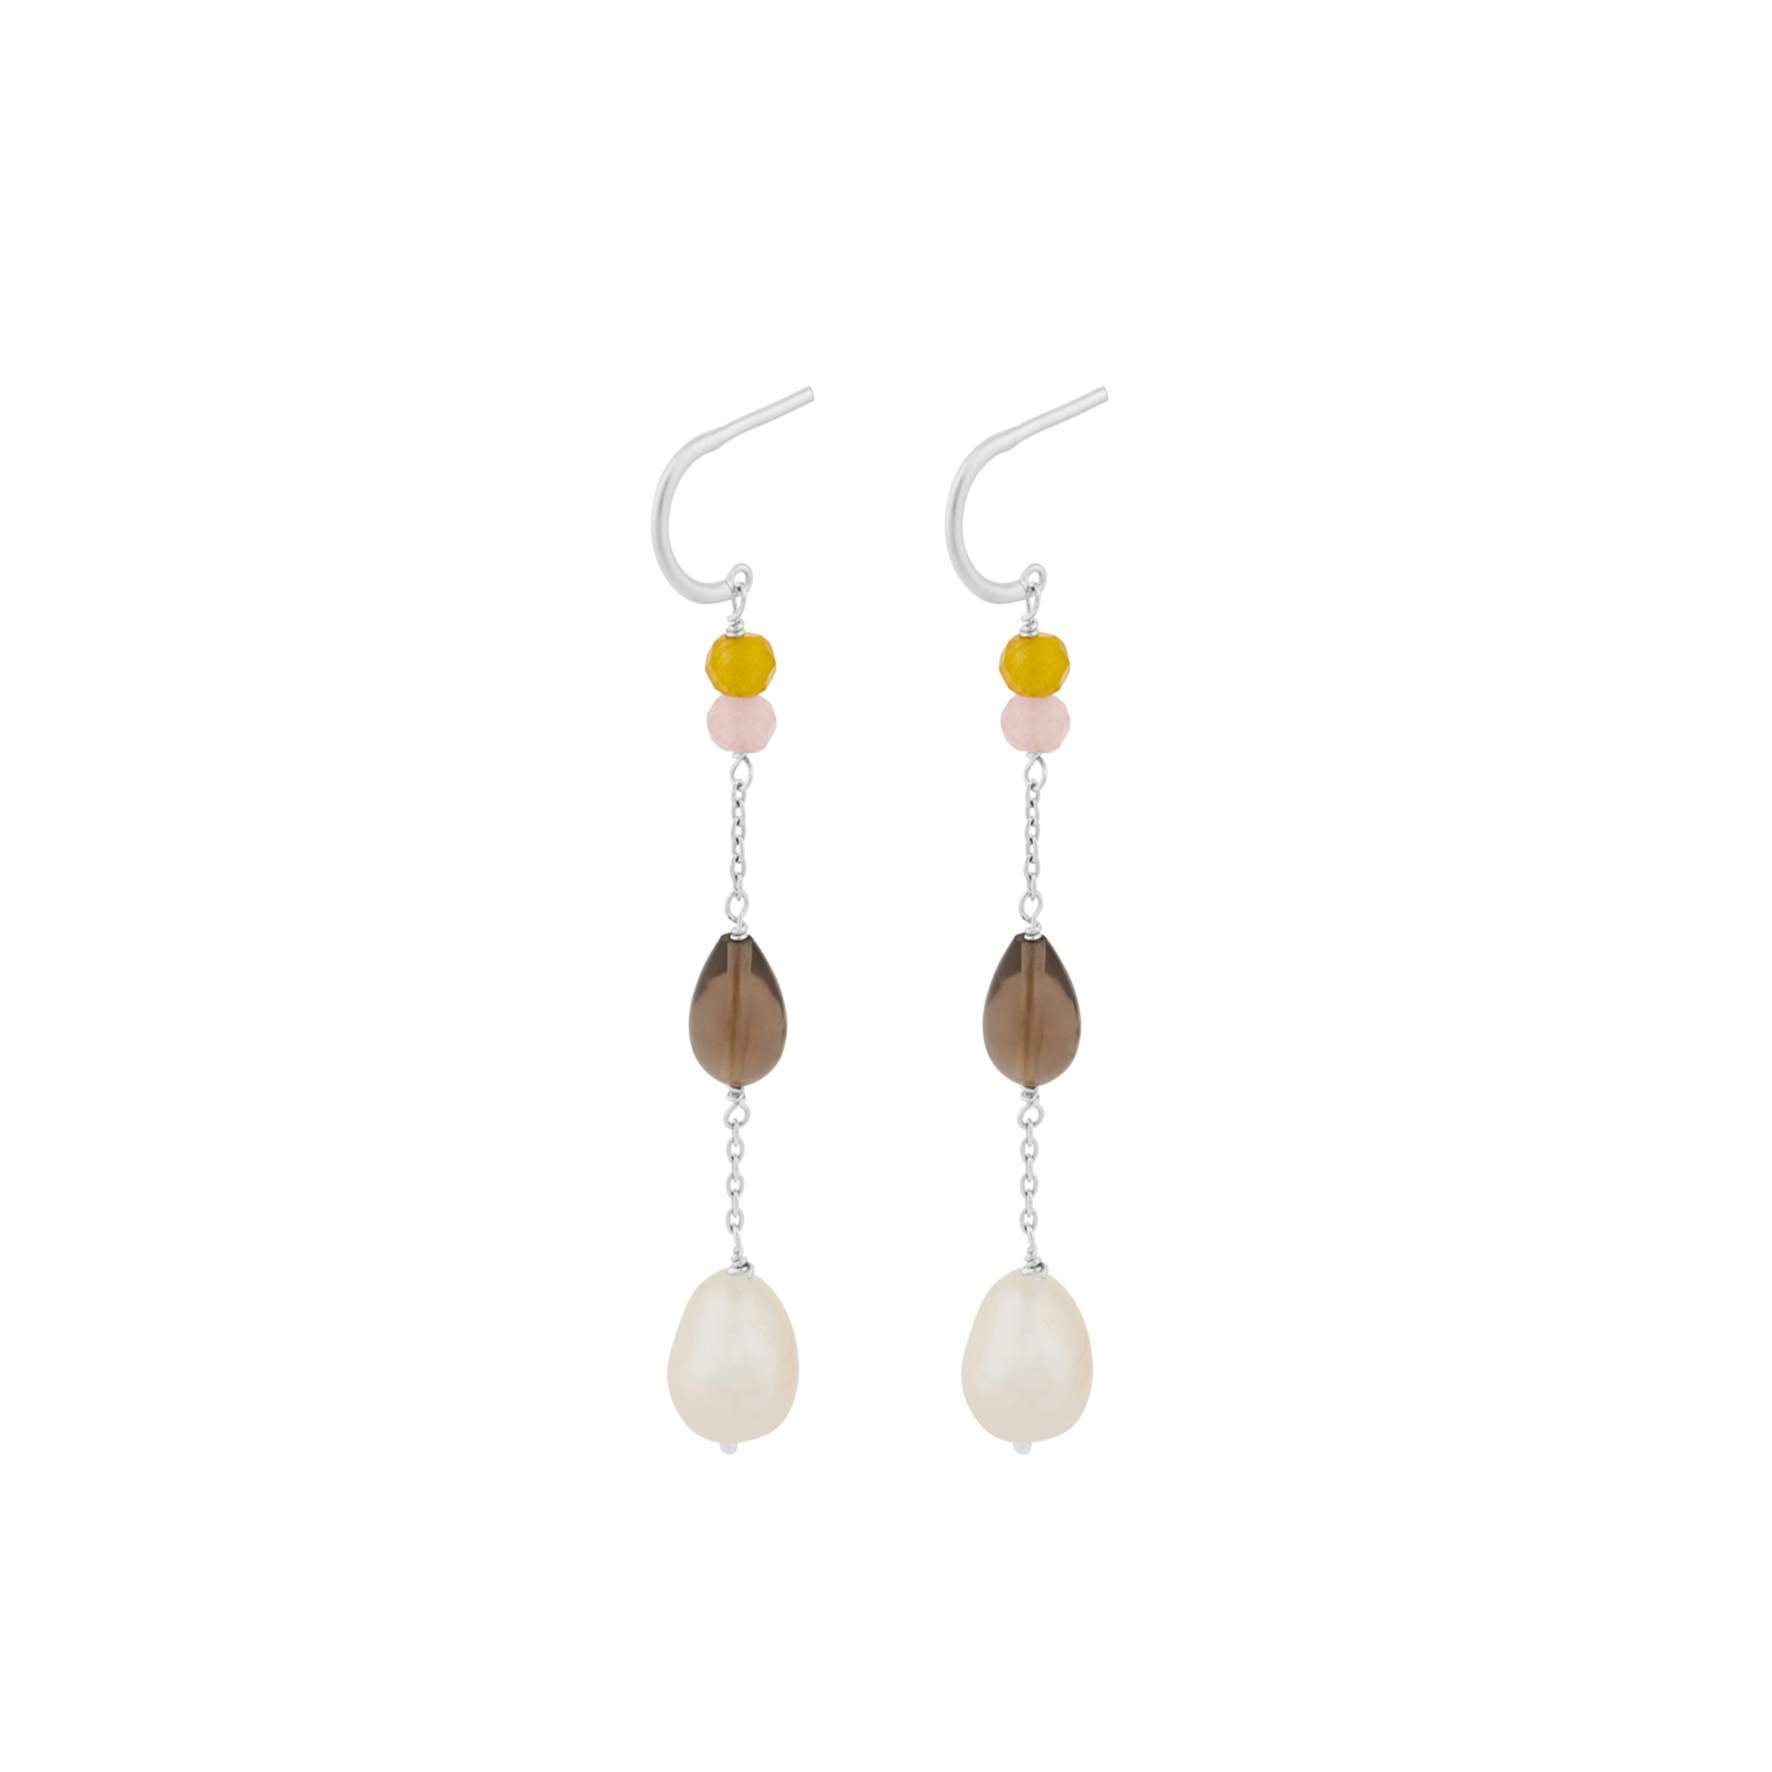 Lagoon Shade Earrings from Pernille Corydon in Silver Sterling 925